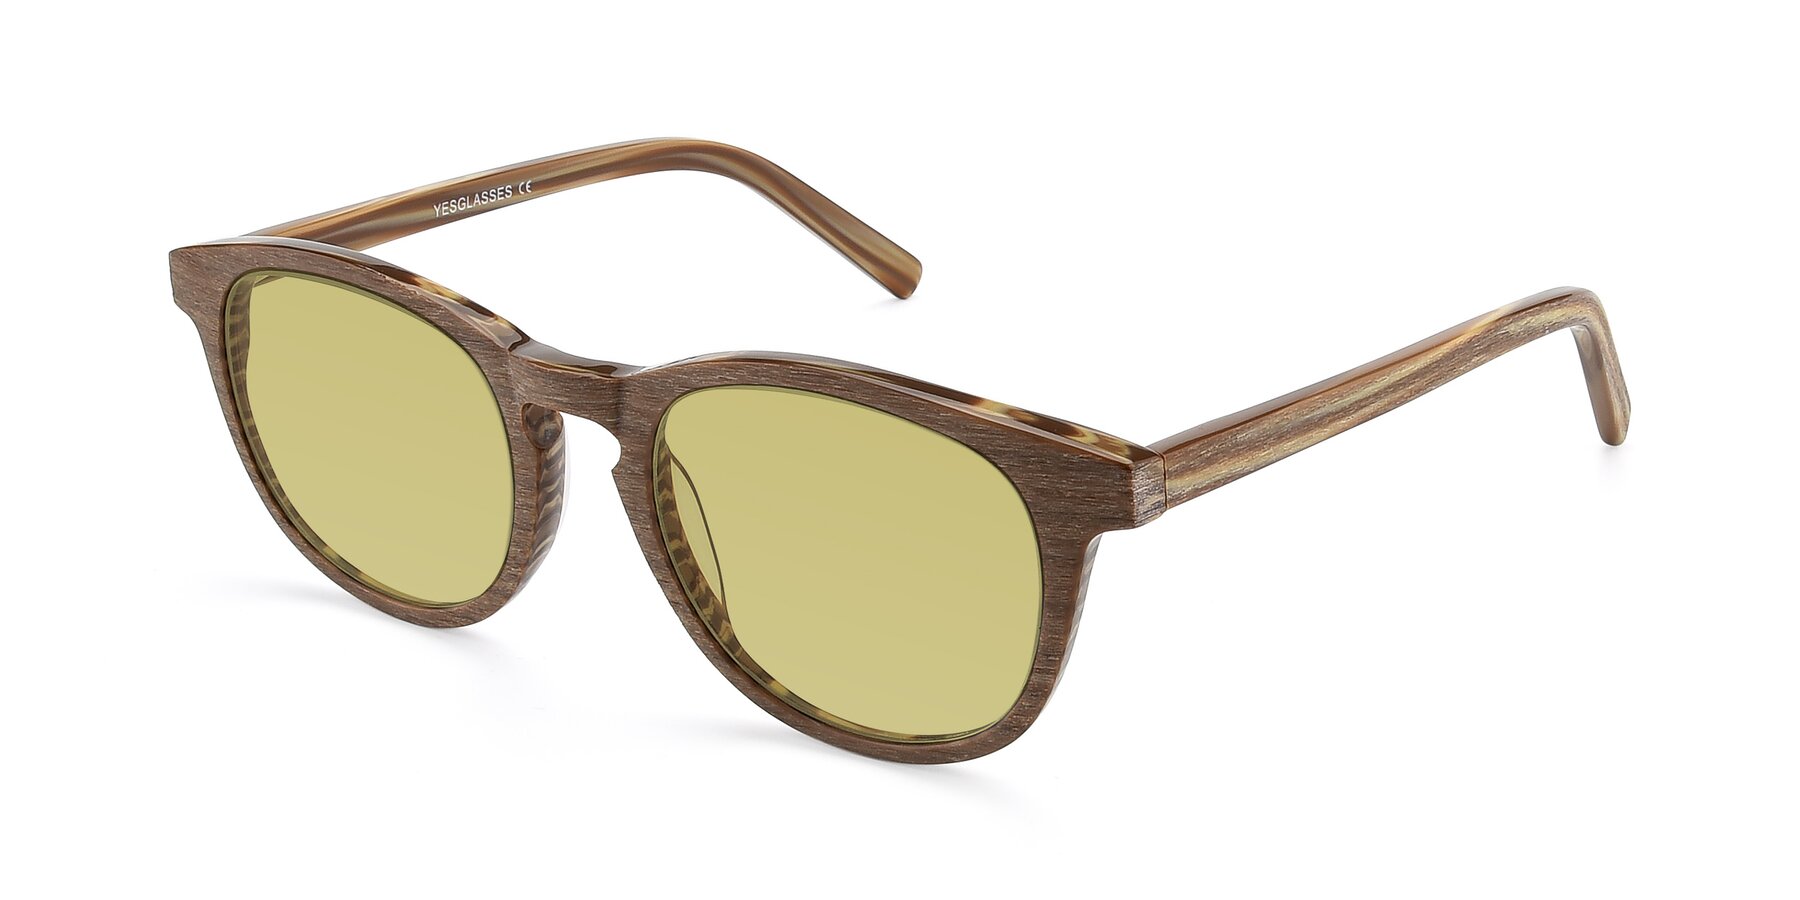 Angle of SR6044 in Brown-Wooden with Medium Champagne Tinted Lenses